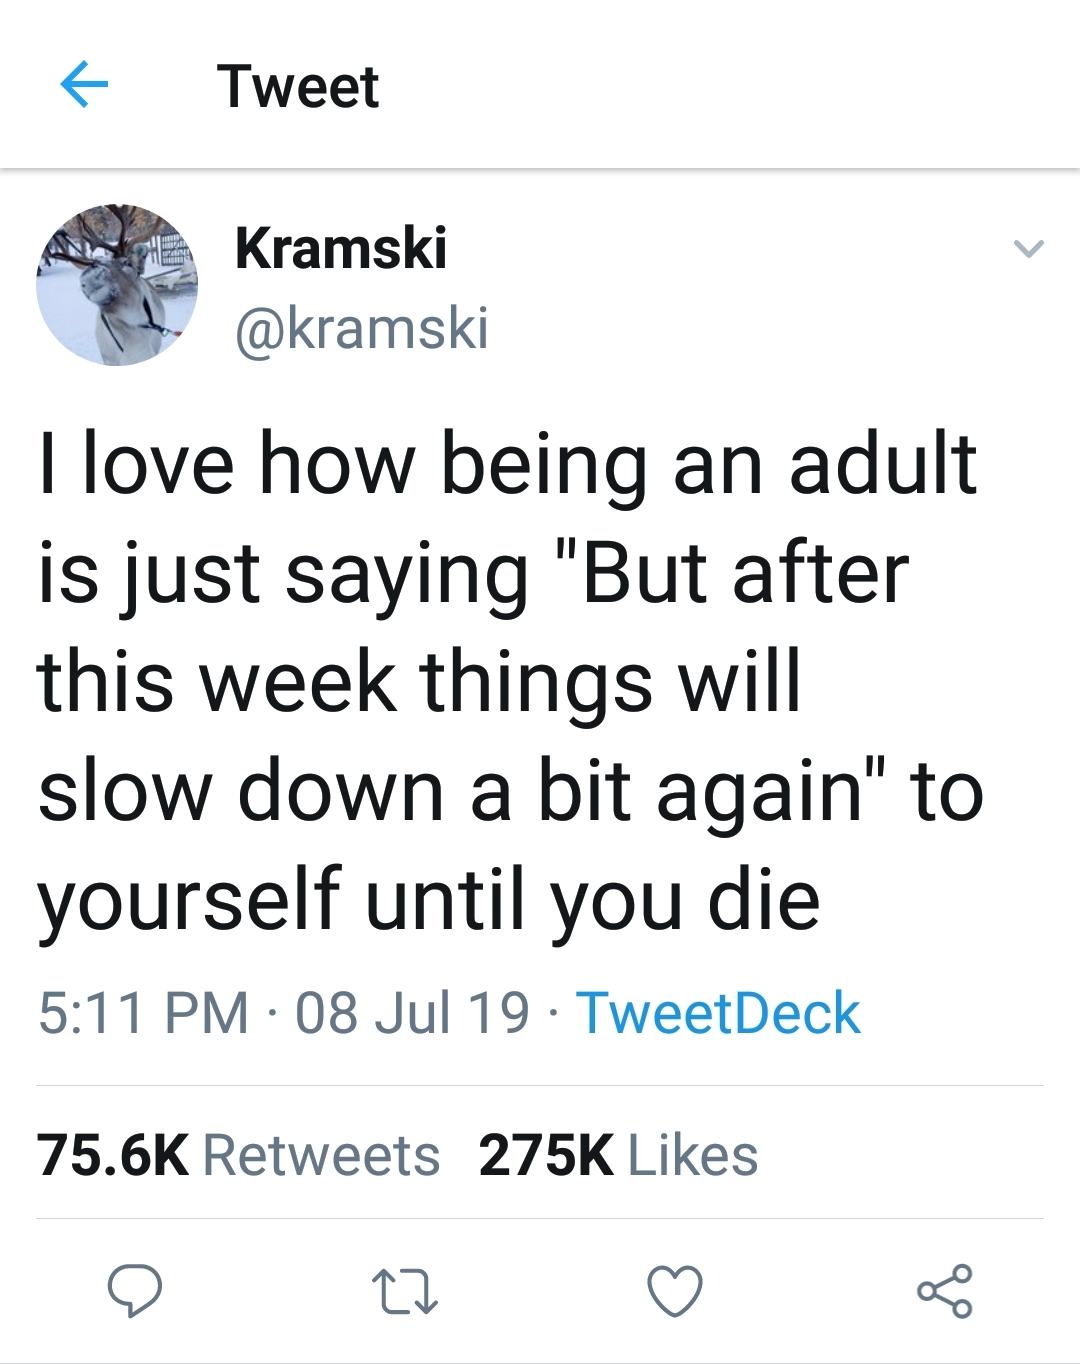 angle - Tweet Ana Kramski I love how being an adult is just saying "But after this week things will slow down a bit again" to yourself until you die 08 Jul 19 . TweetDeck